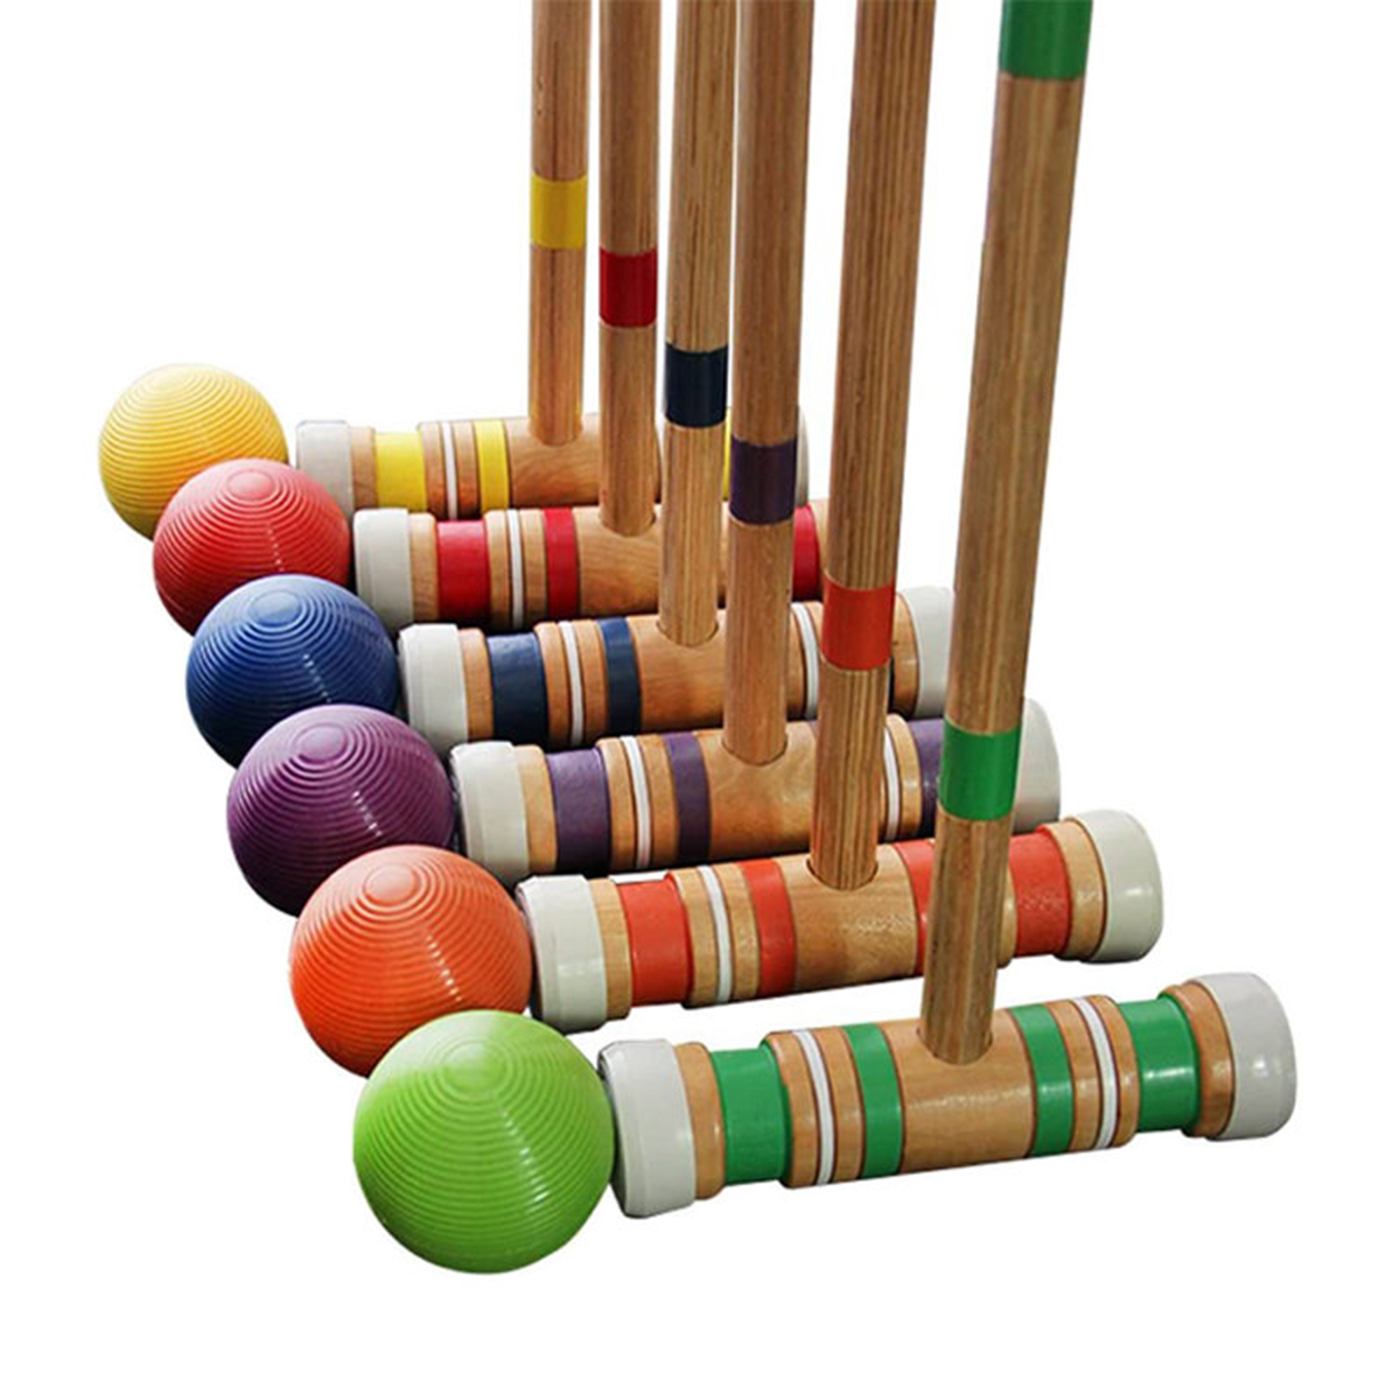 Promotional Croquet Set With Bag1